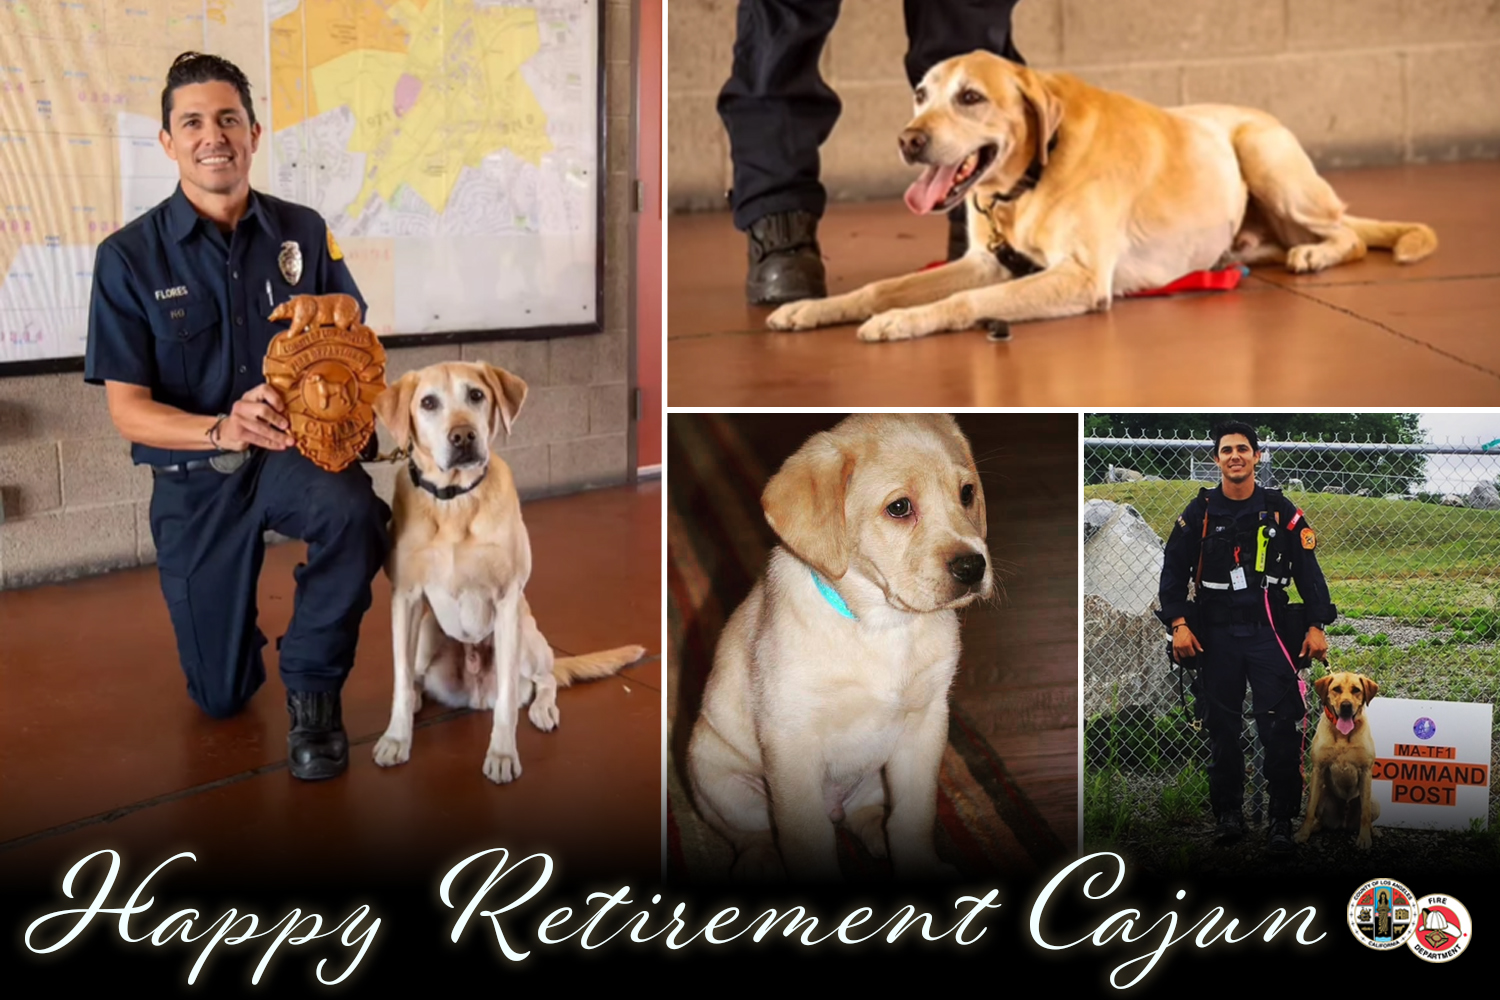 On Wednesday, November 9, 2022, the Los Angeles County Fire Department (LACoFD) honored Cajun, a lifeline canine, with a retirement ceremony at fire station 187 in Pomona.